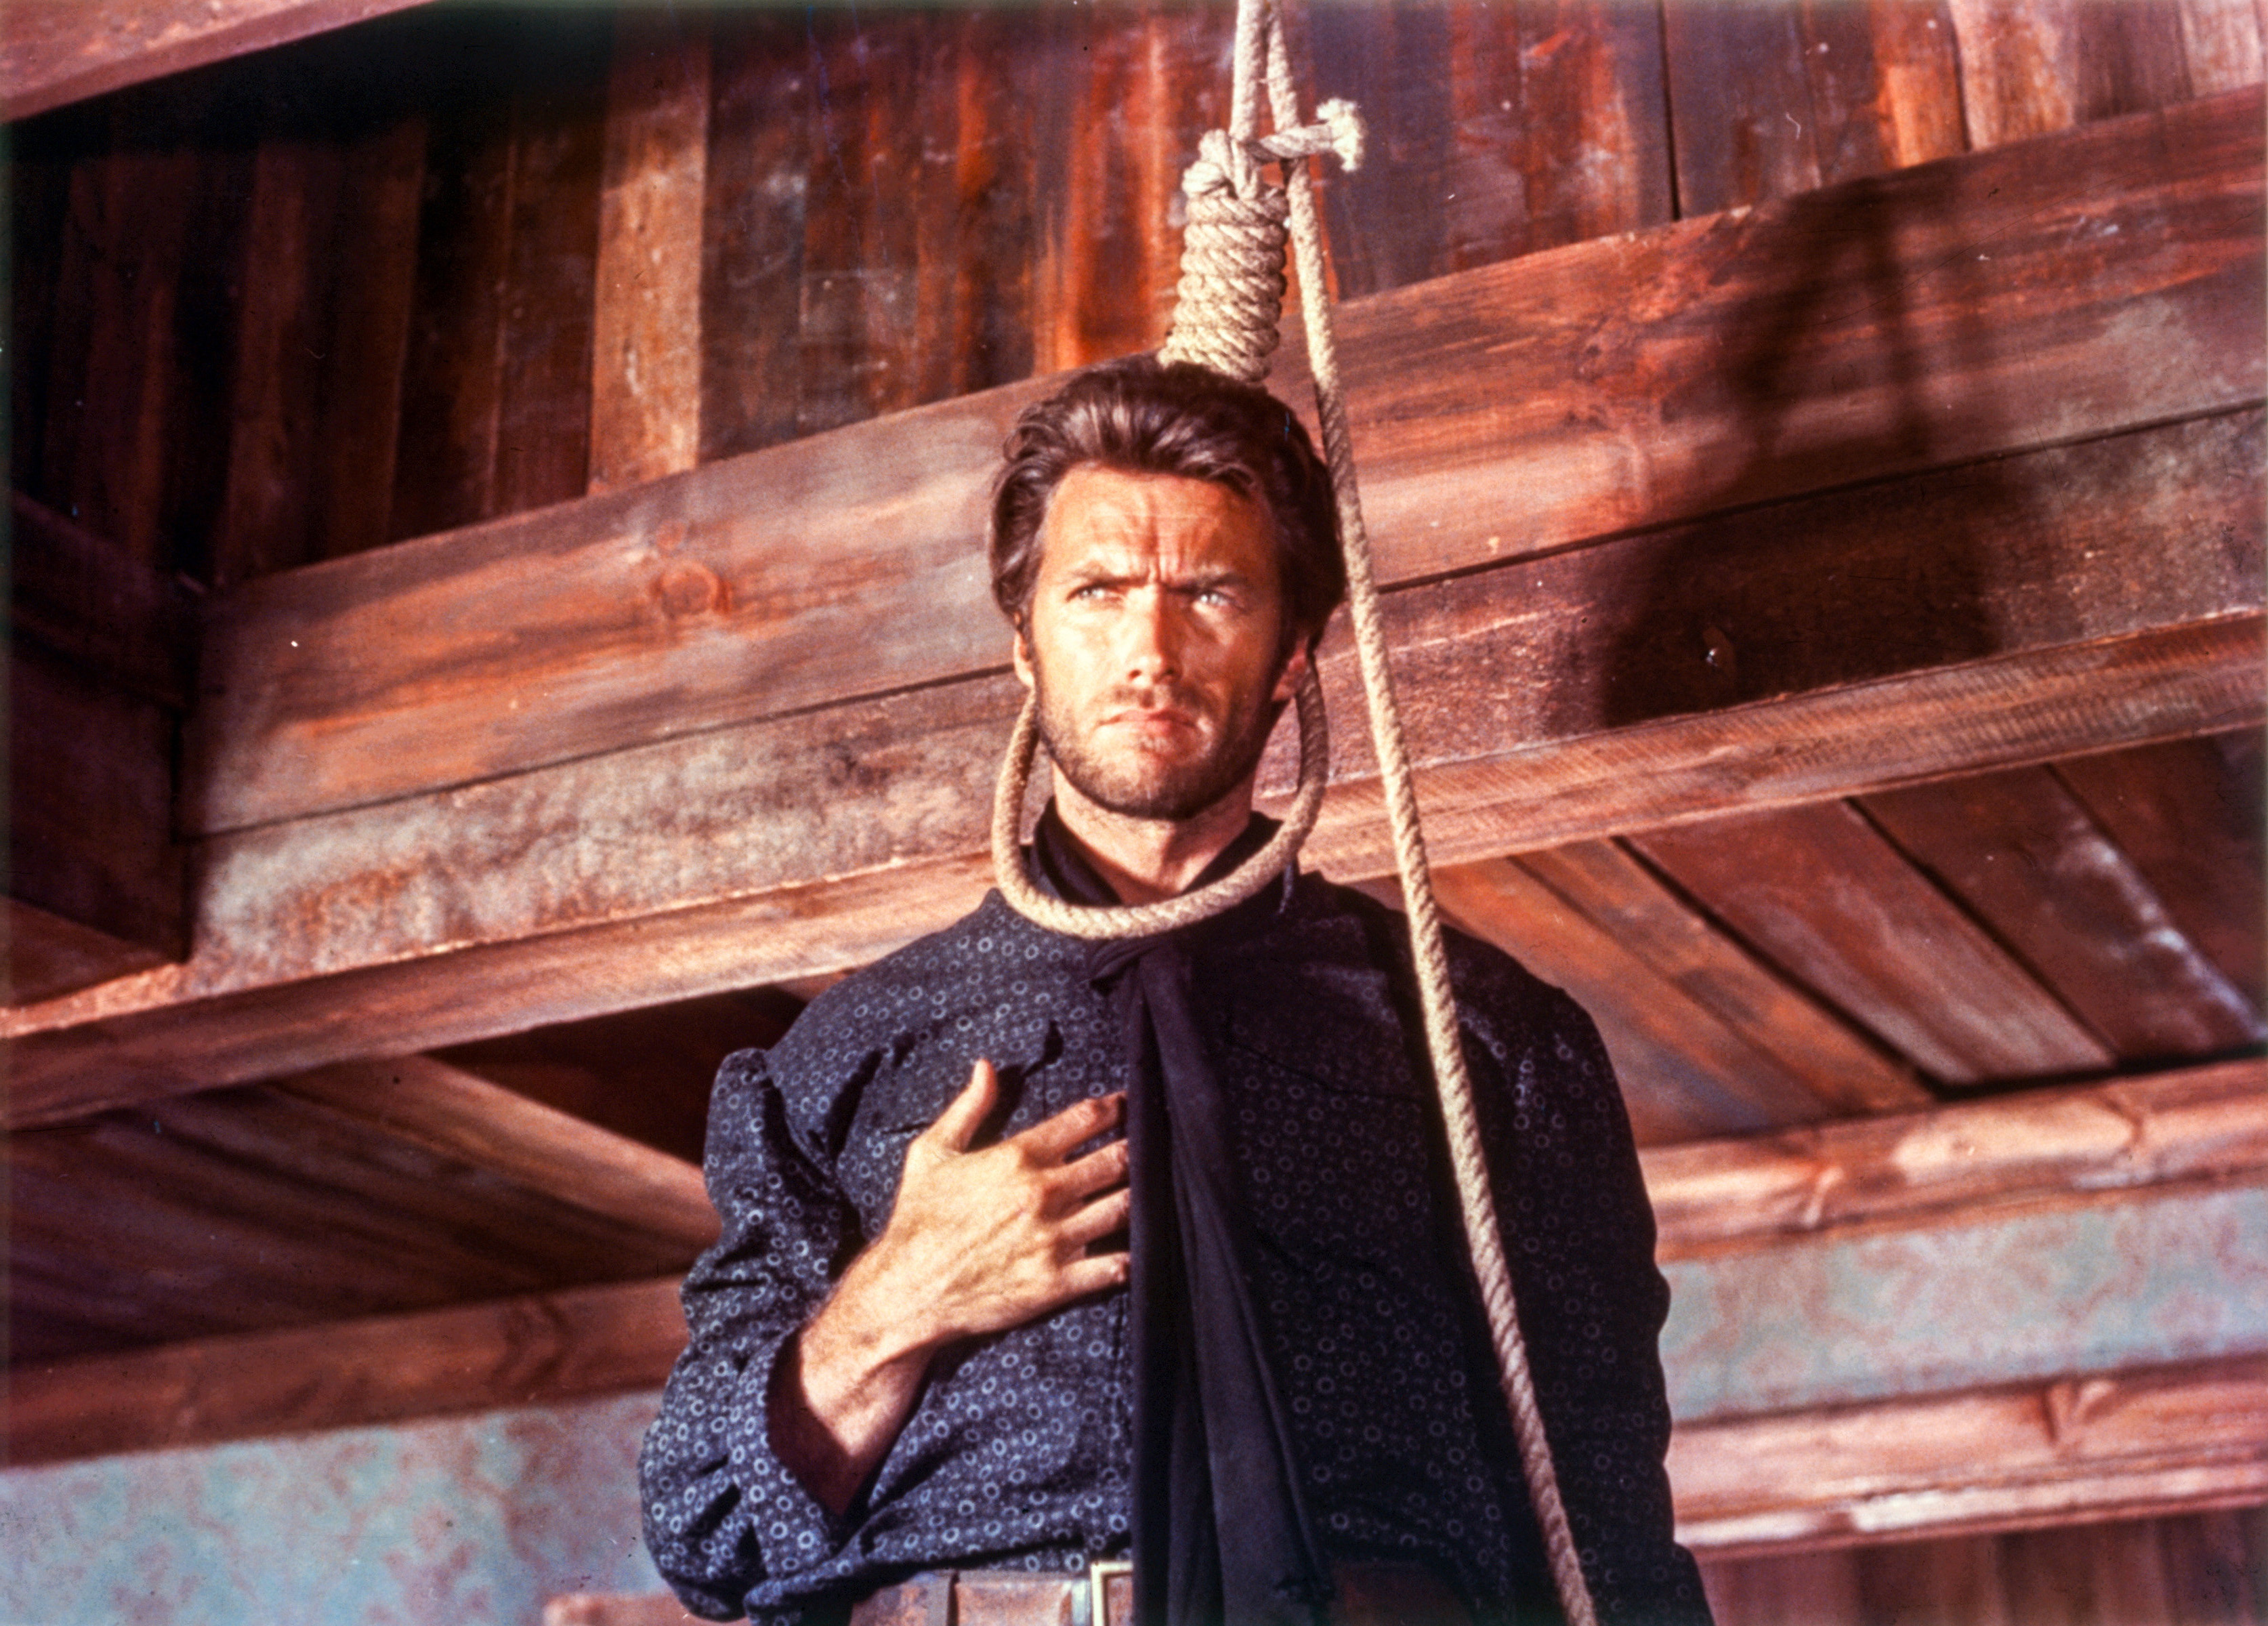 Clint Eastwood in The Good the Bad and the Ugly.